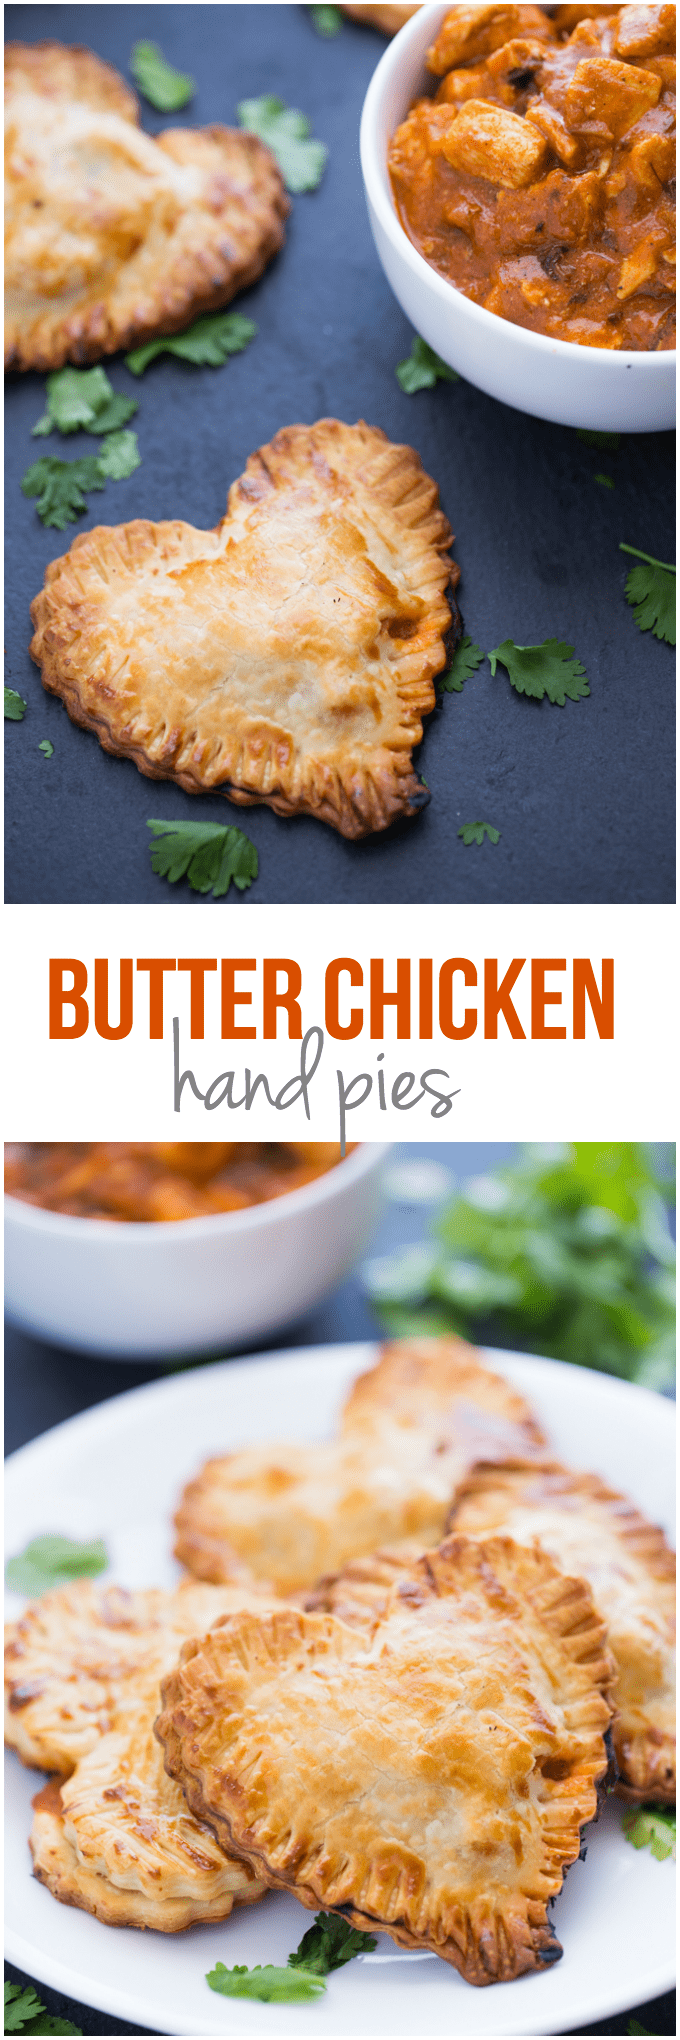 Butter Chicken Hand Pies - The best homemade Valentine's Day dinner ever! Make these heart pies with love and be done in 40 minutes flat. Creamy, flavourful Butter Chicken is stuffed inside a golden, flaky heart shaped crust! 